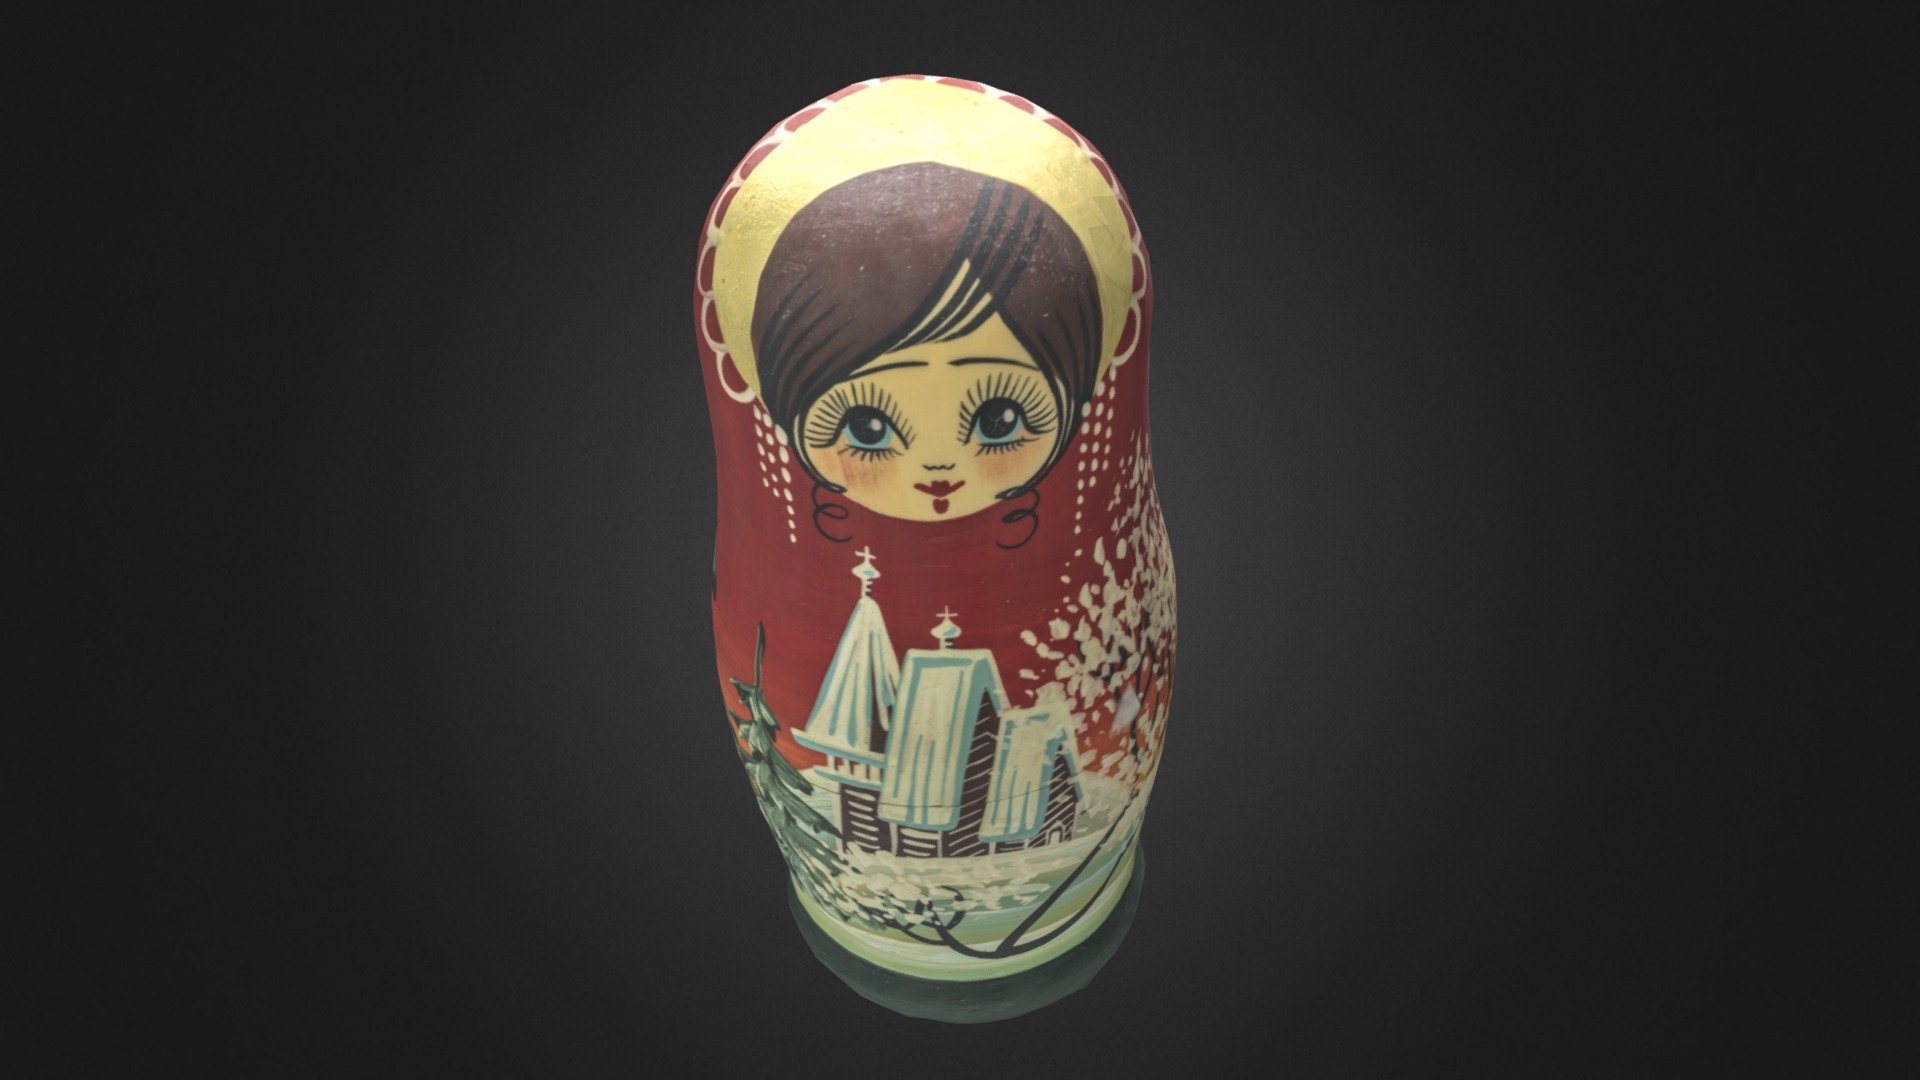 3D scan of an authentic Russian Matryoshka doll using Photogrammetry #1scanaday . Created in RealityCapture by Capturing Reality from 98 images in 00h:02m:46s 3d model